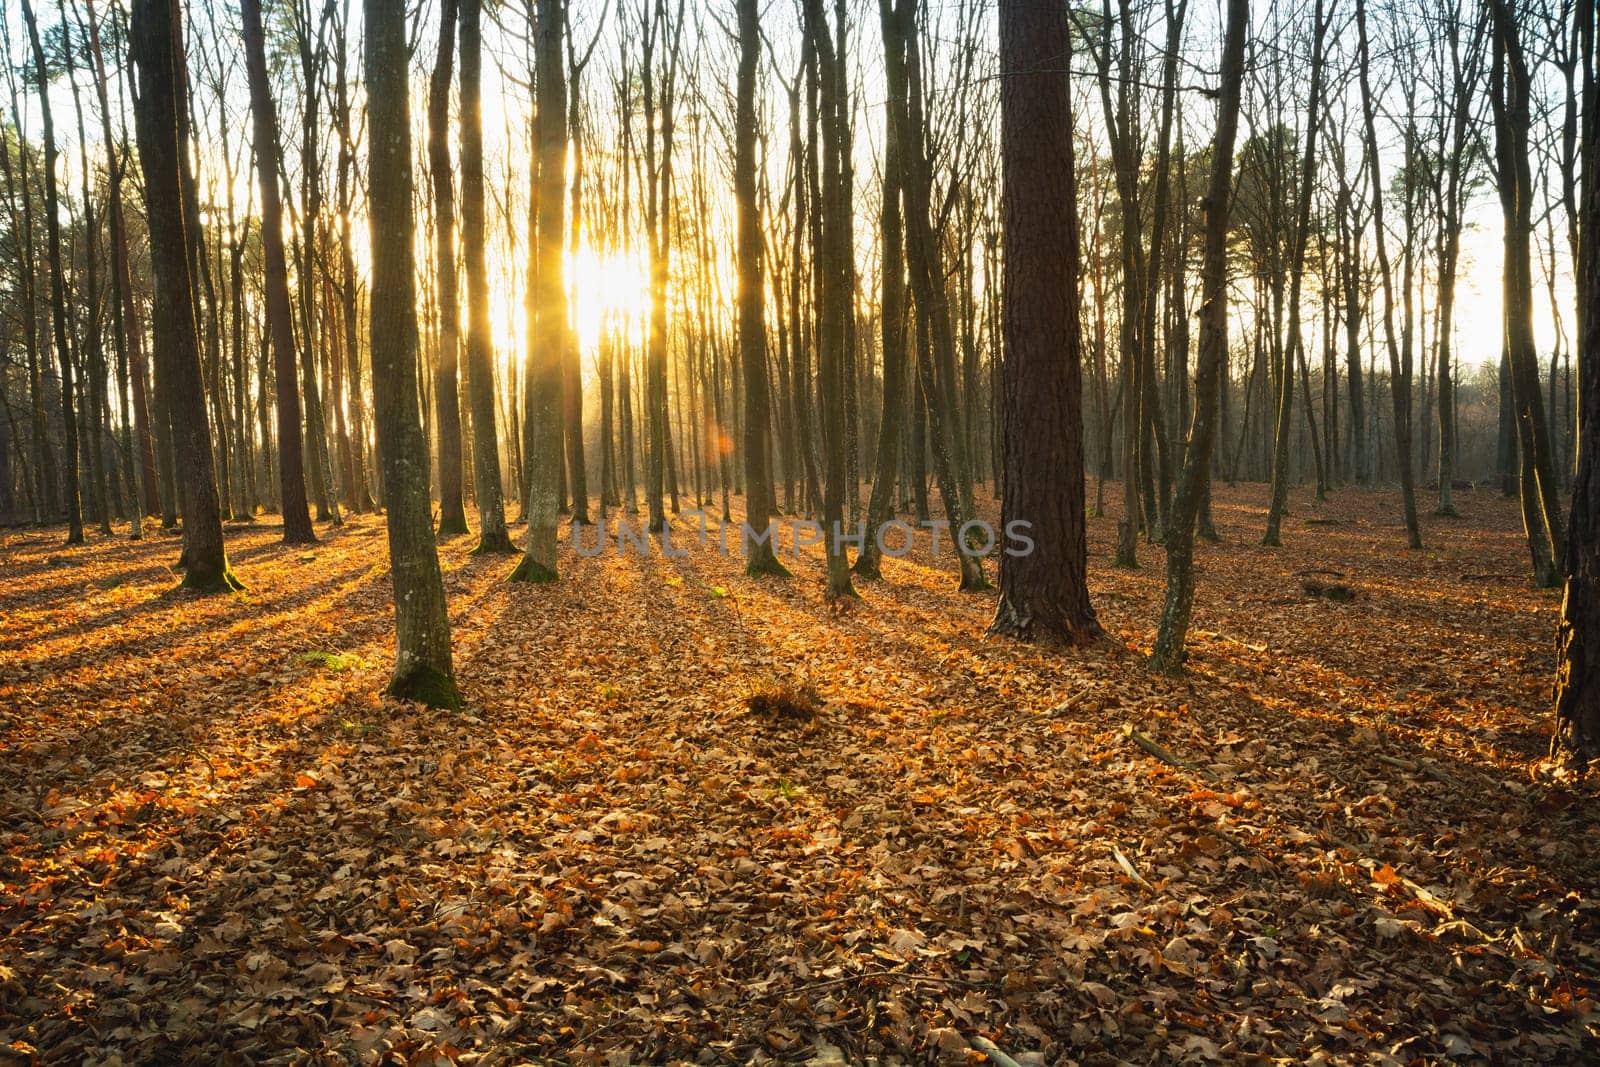 The sun behind the trees in the autumn forest, eastern Poland